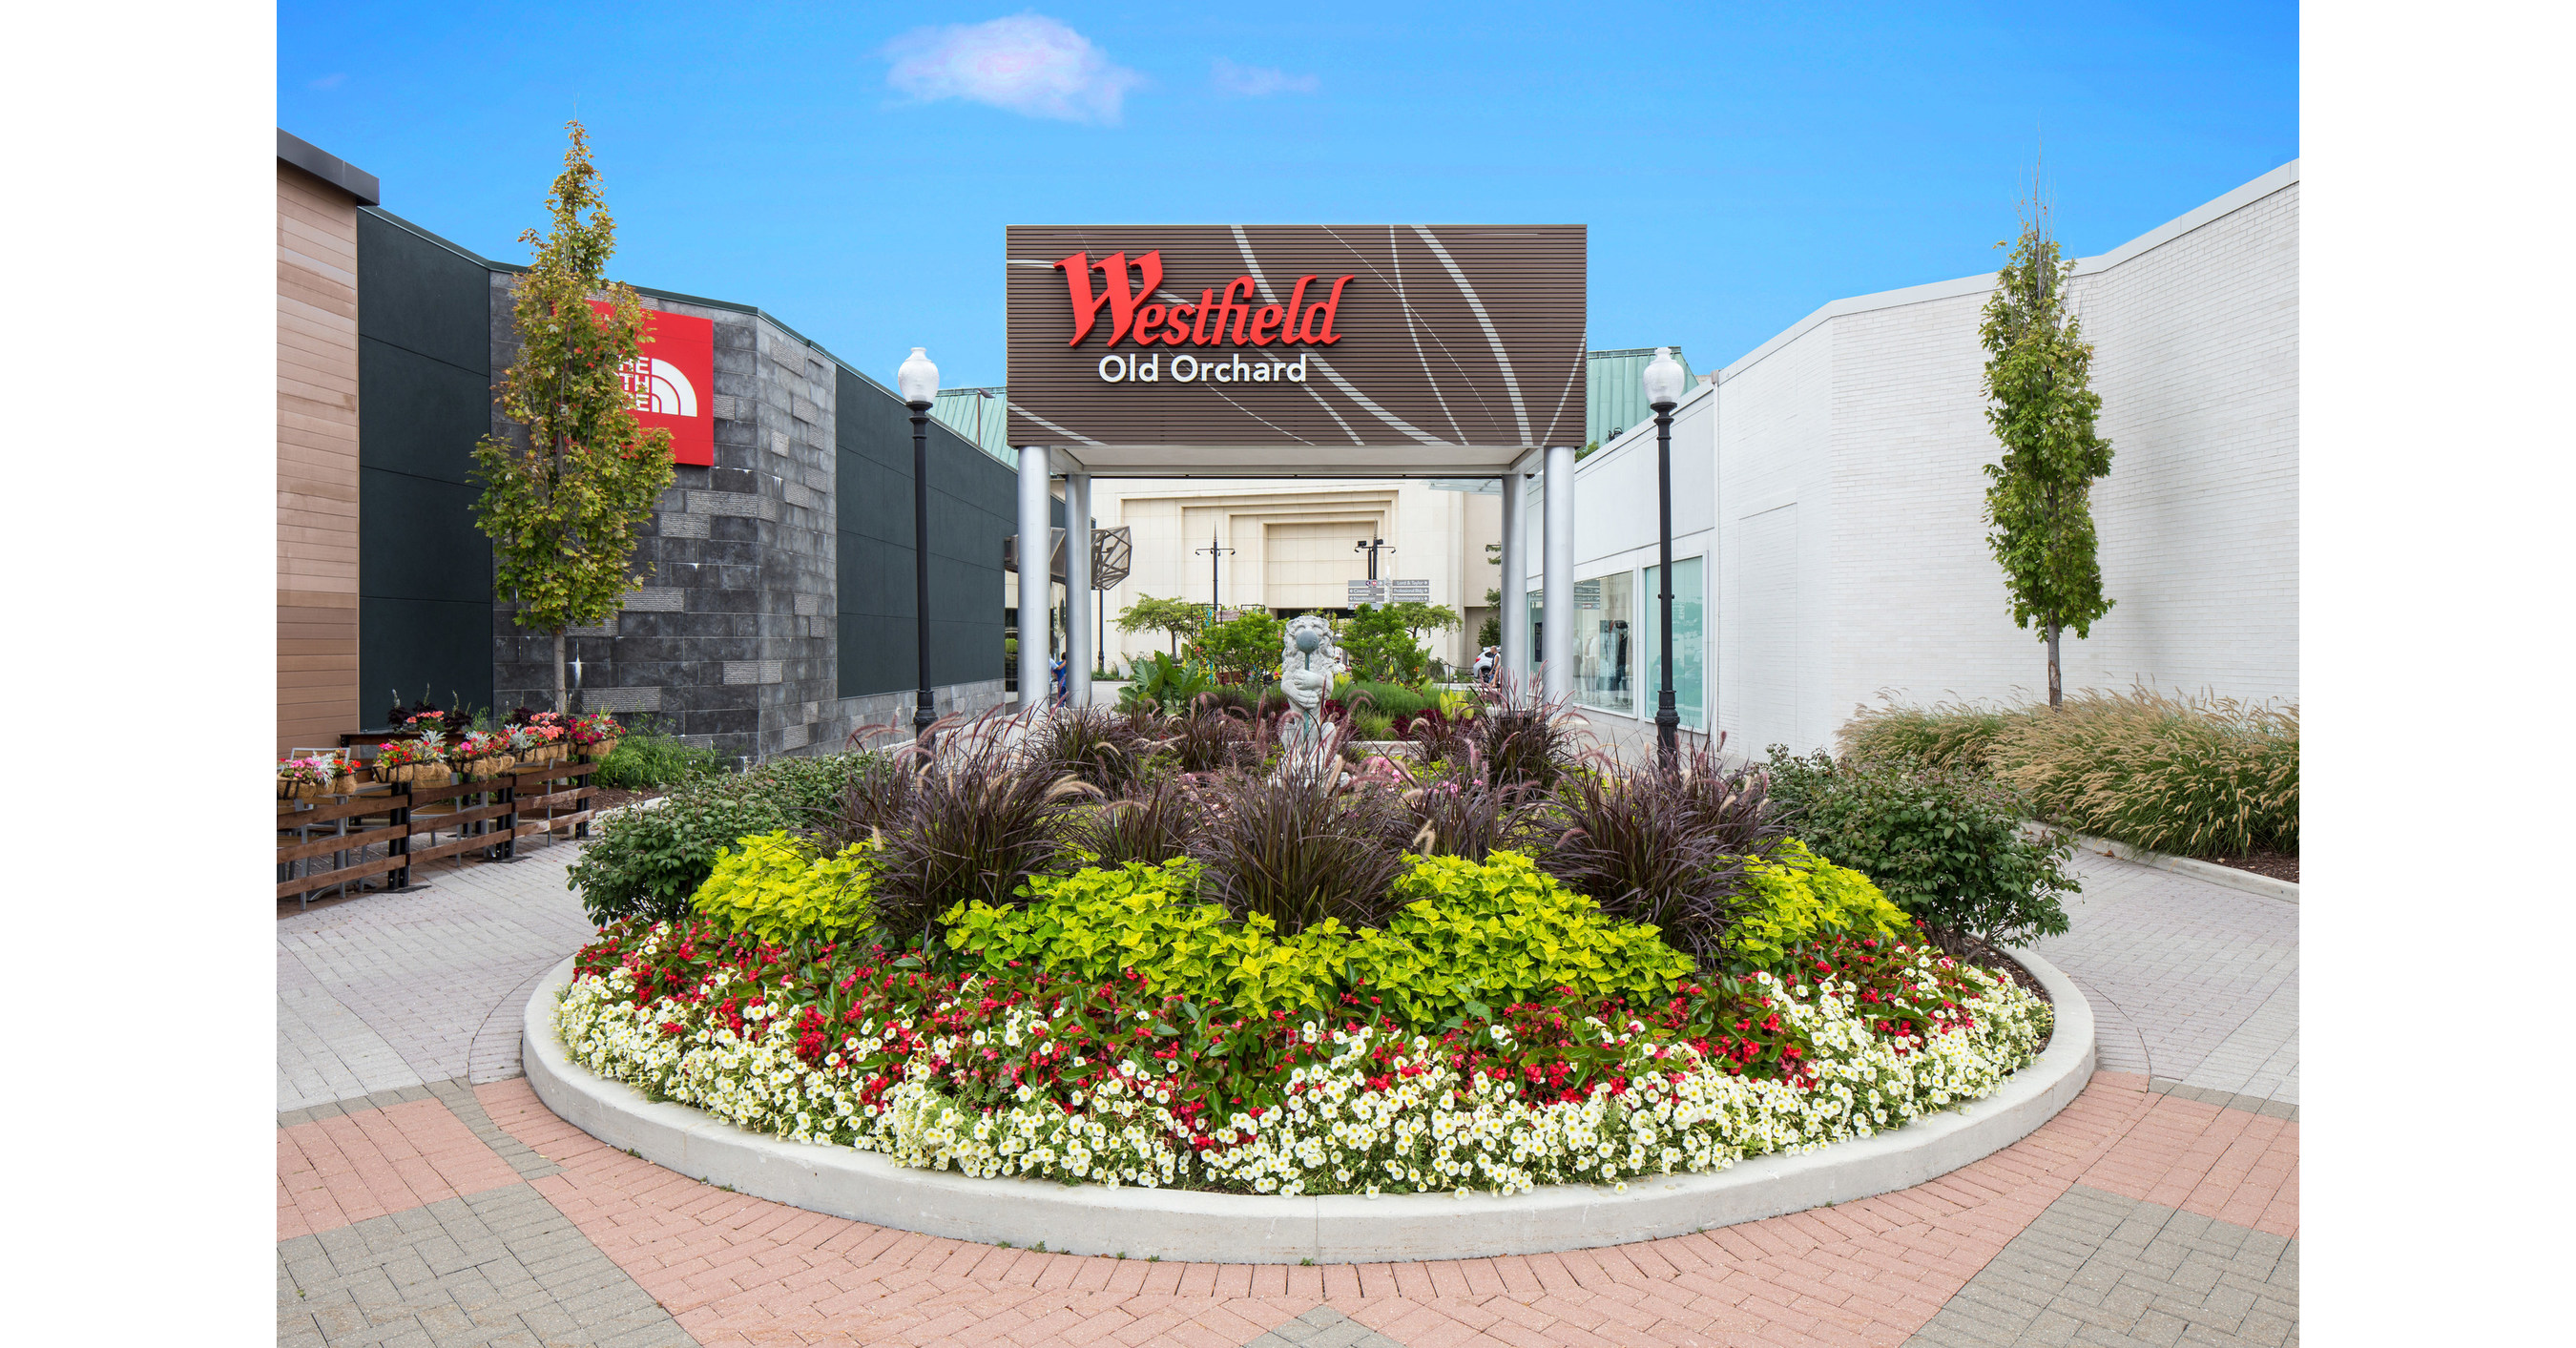 Our Westfield Old Orchard boutique has reopened!  Take a peek at our  entirely refreshed Westfield Old Orchard luxury resale boutique. We have a  store full of beautiful finds just waiting for